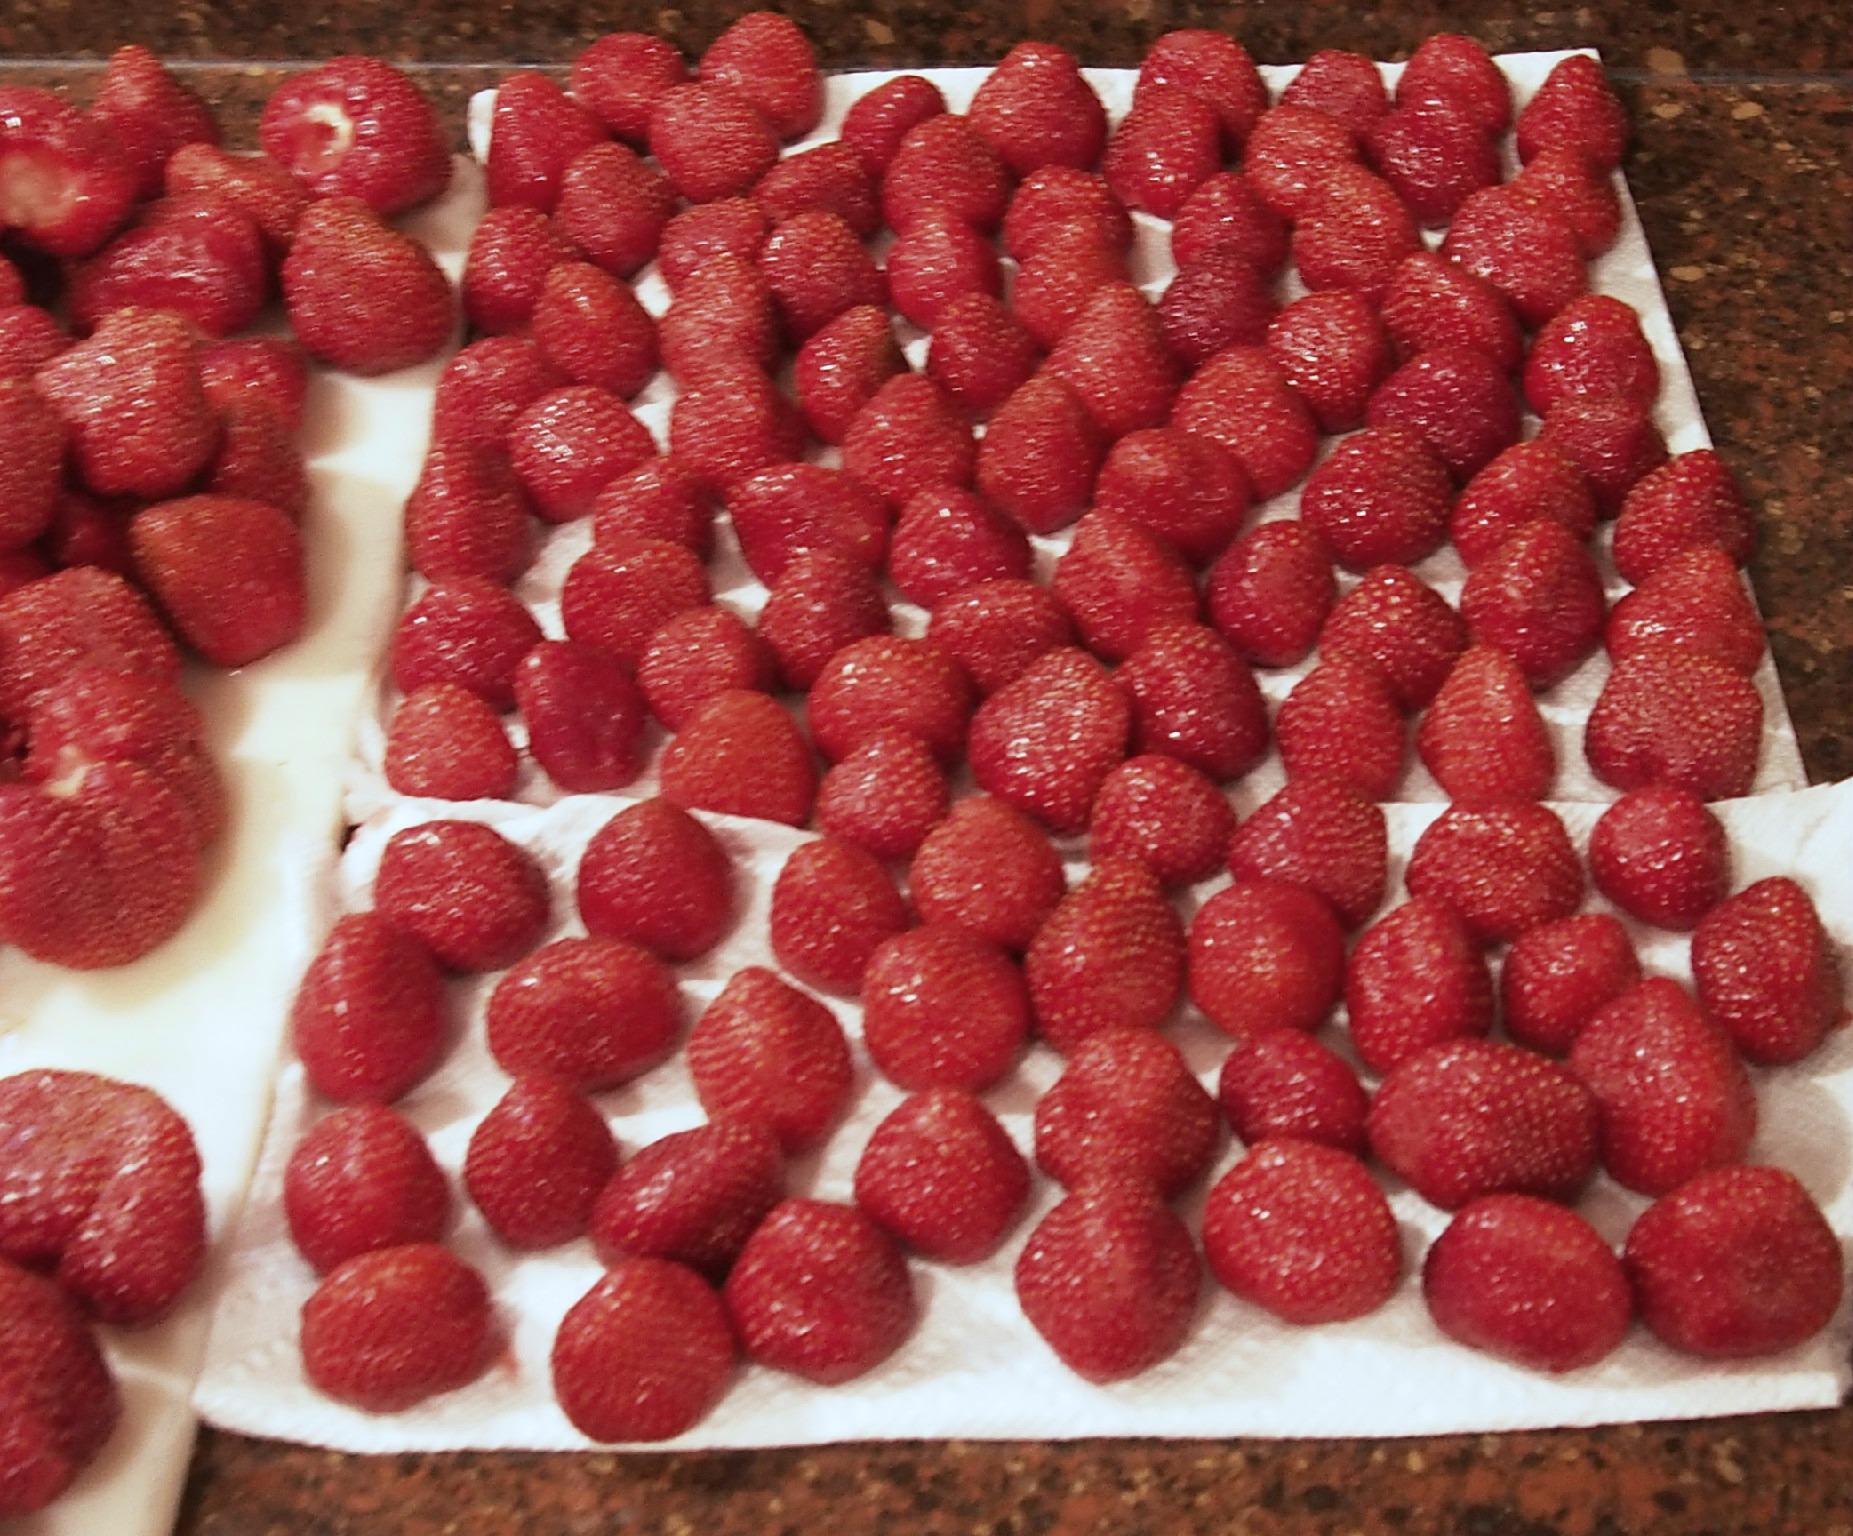 drying-strawberries-for-pie